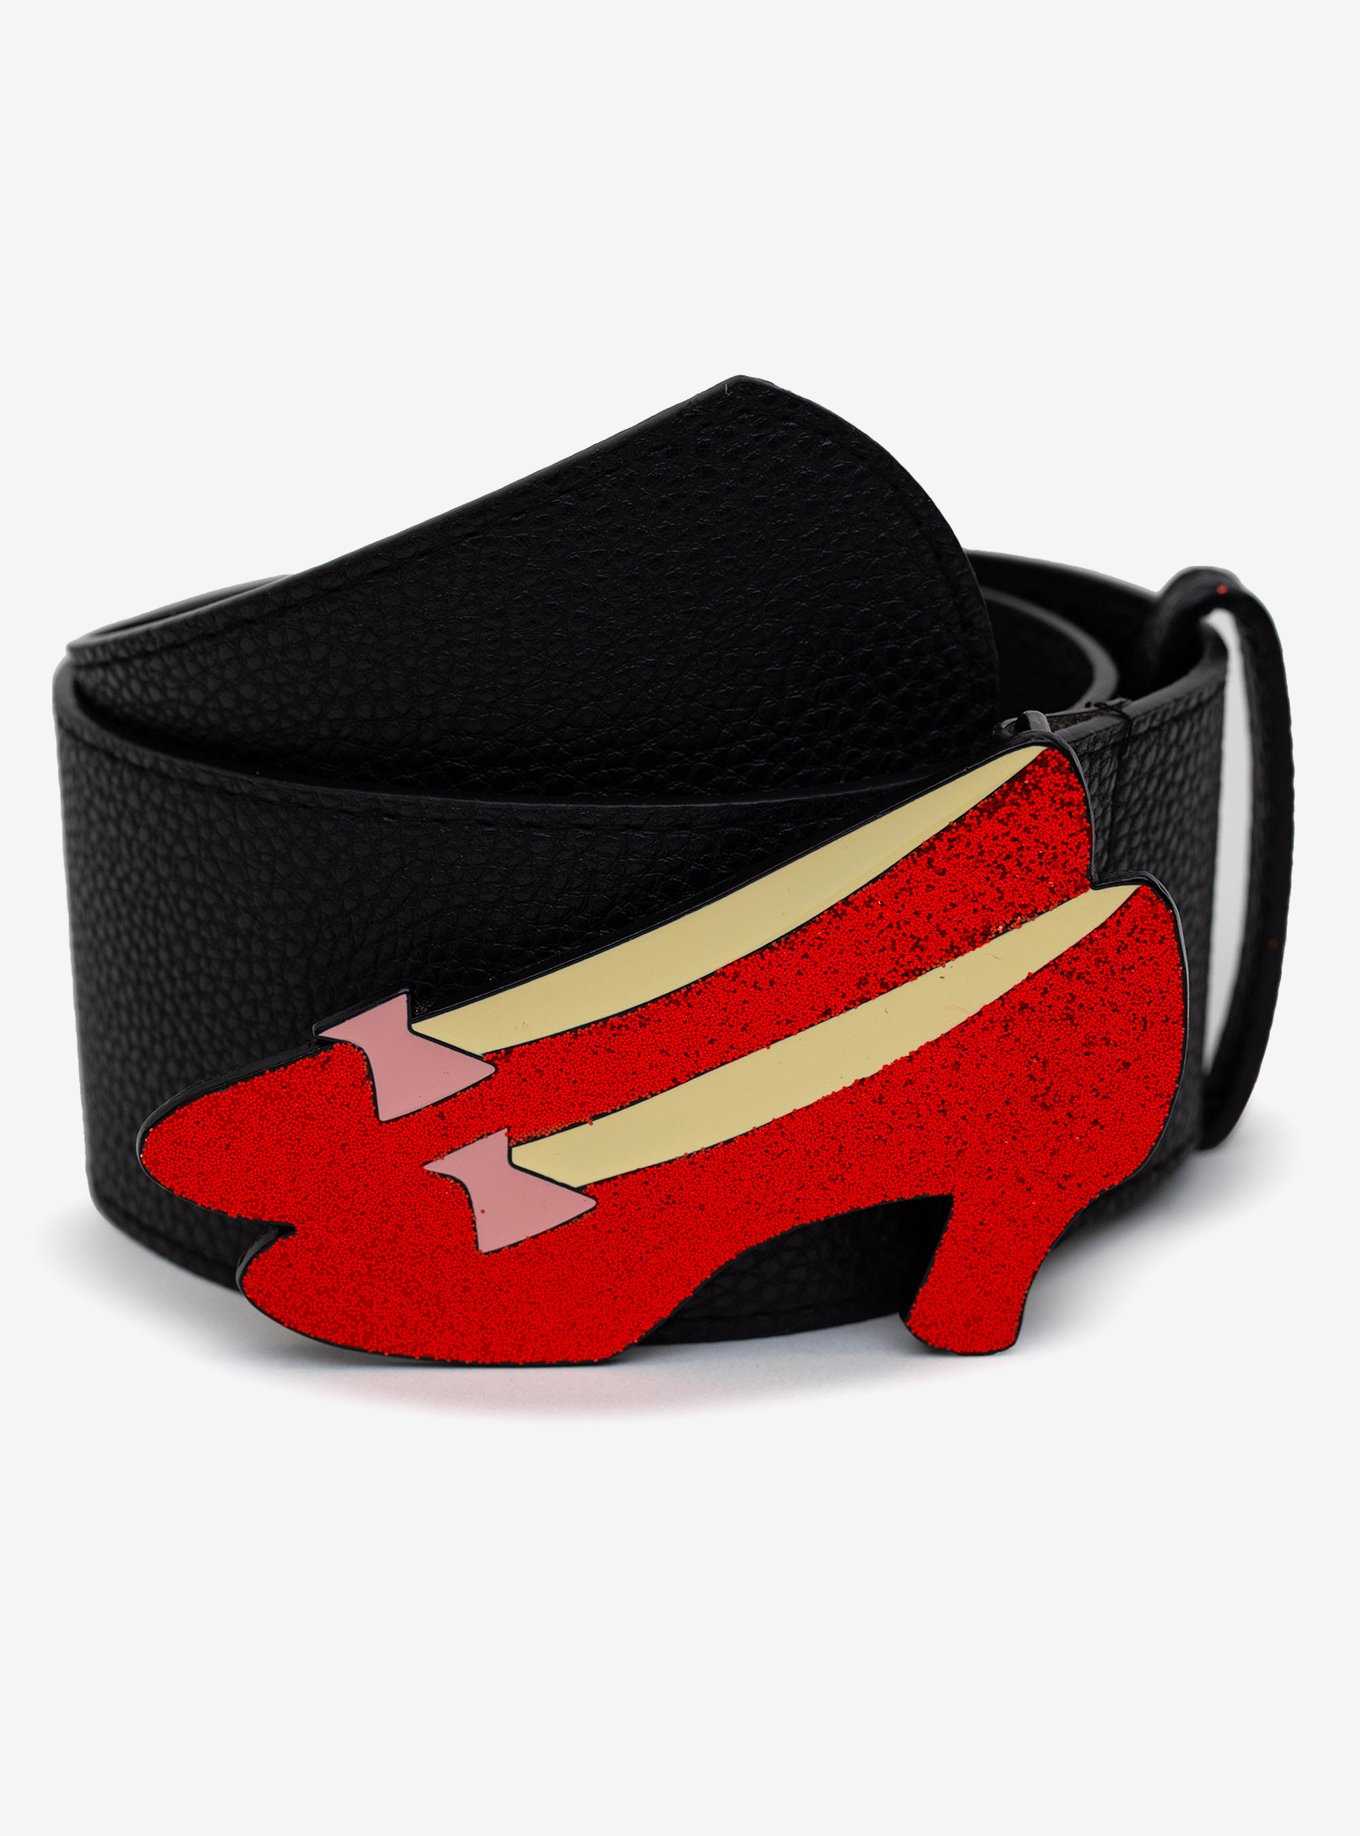 The Wizard Of Oz Dorothy's Ruby Red Glitter Slippers Enamel Cast Buckle Belt, , hi-res